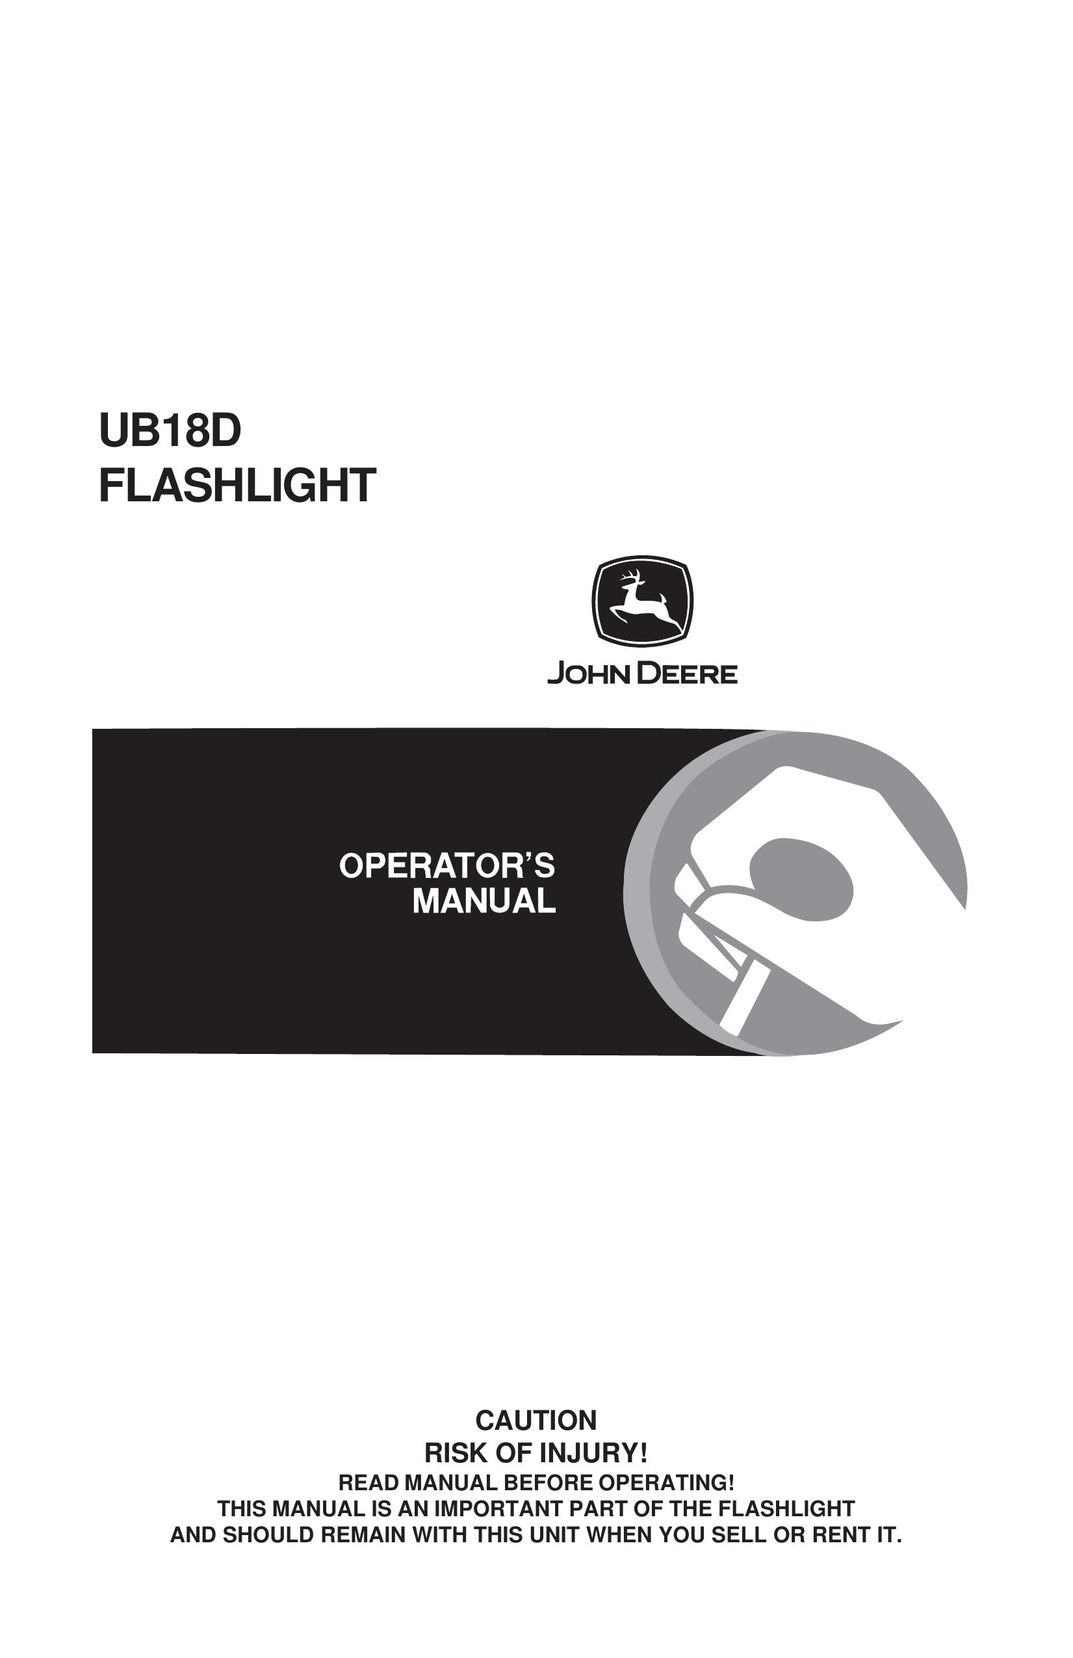 John Deere UB18D Home Safety Product User Manual